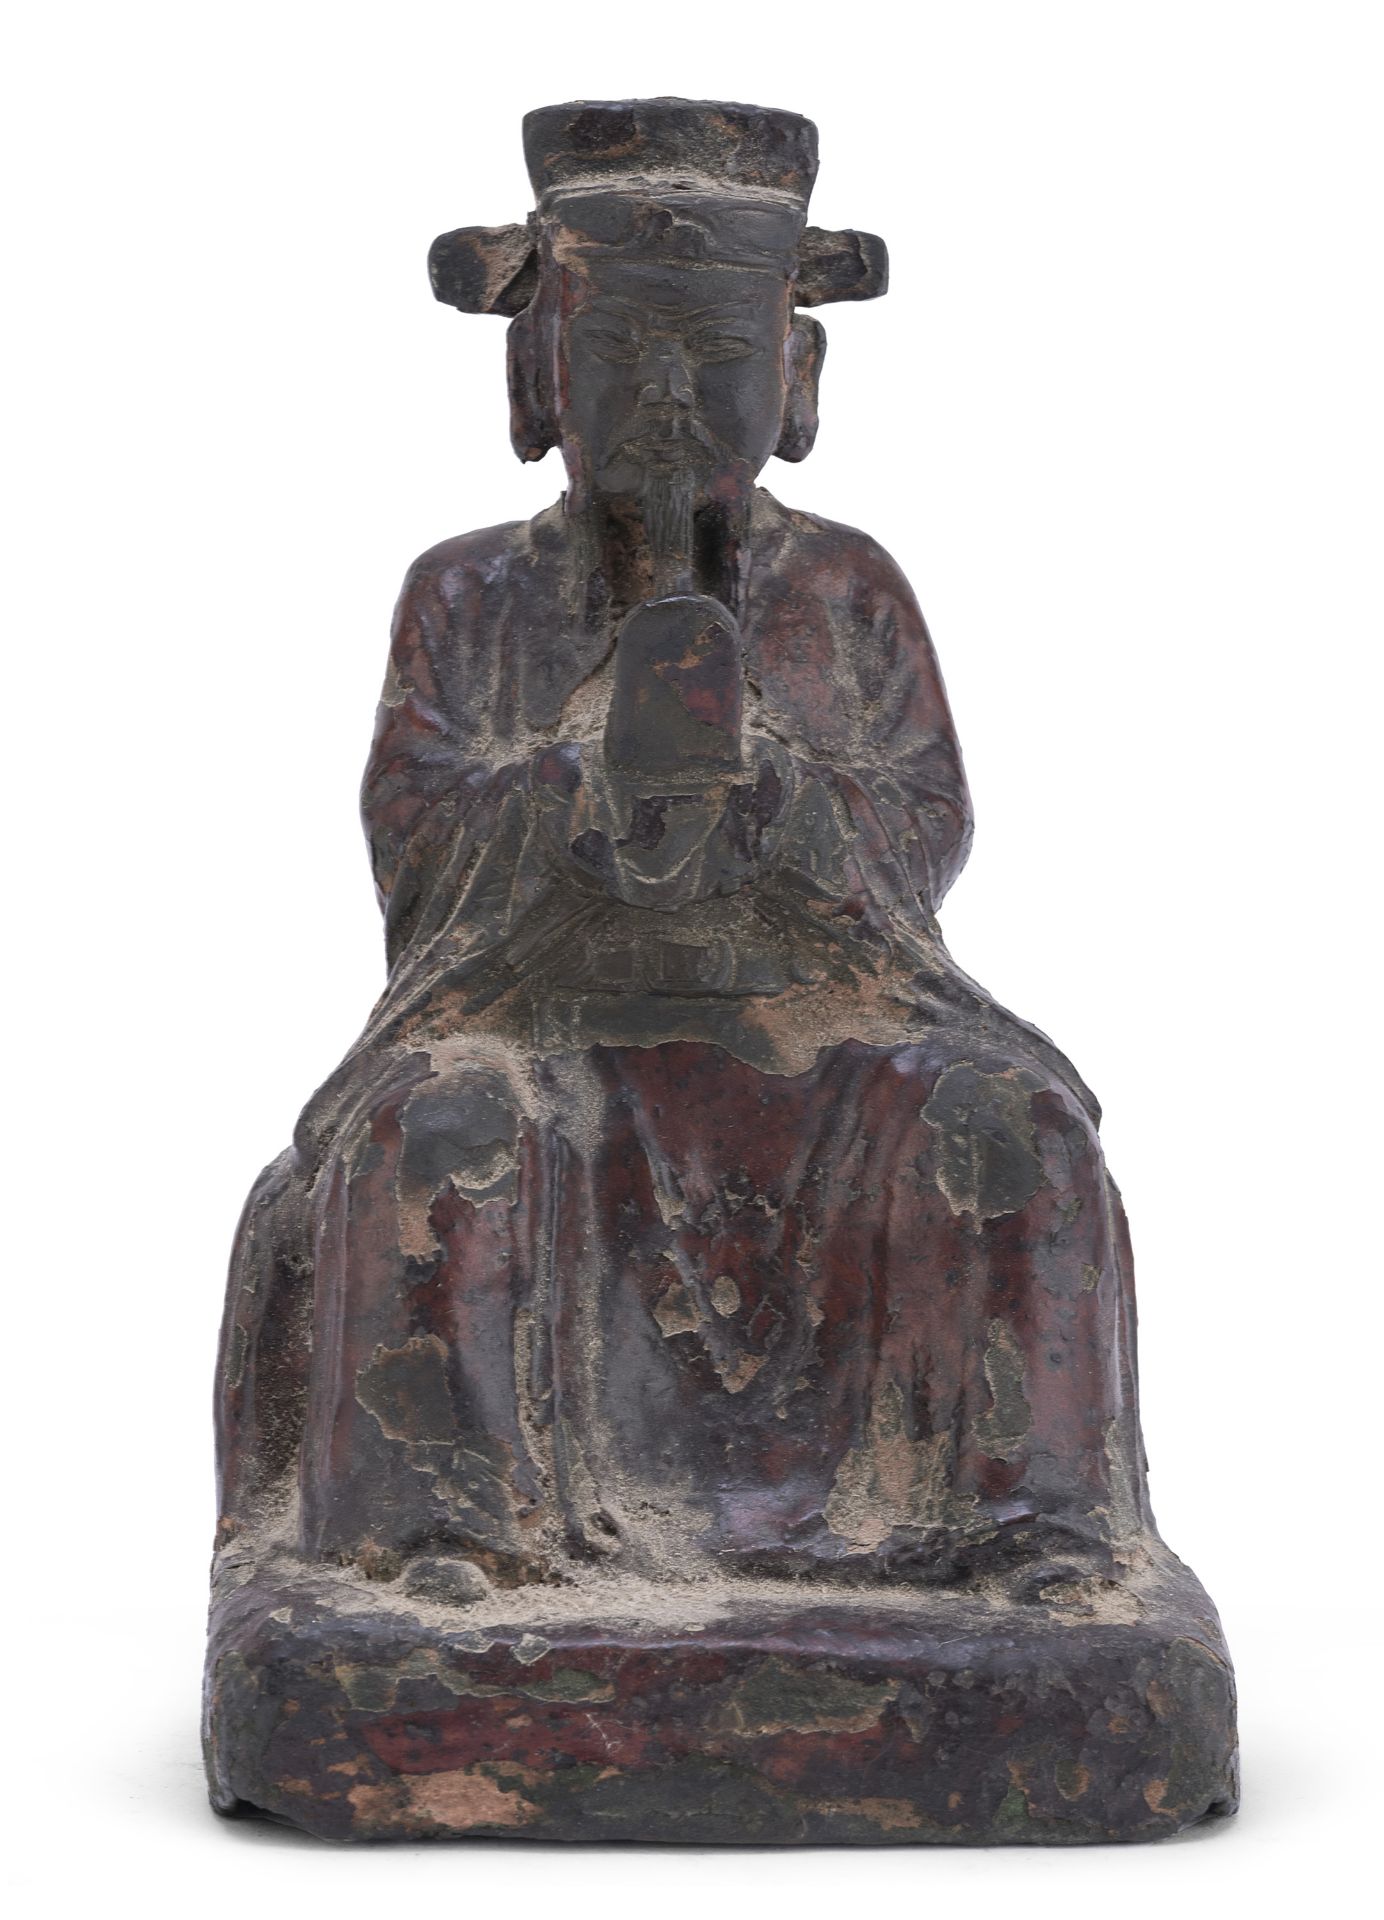 A CHINESE RED LACQUER BRONZE SCULPTURE DEPICTING YUHUANG SHANGDI. EARLY 20TH CENTURY. DEFECTS.